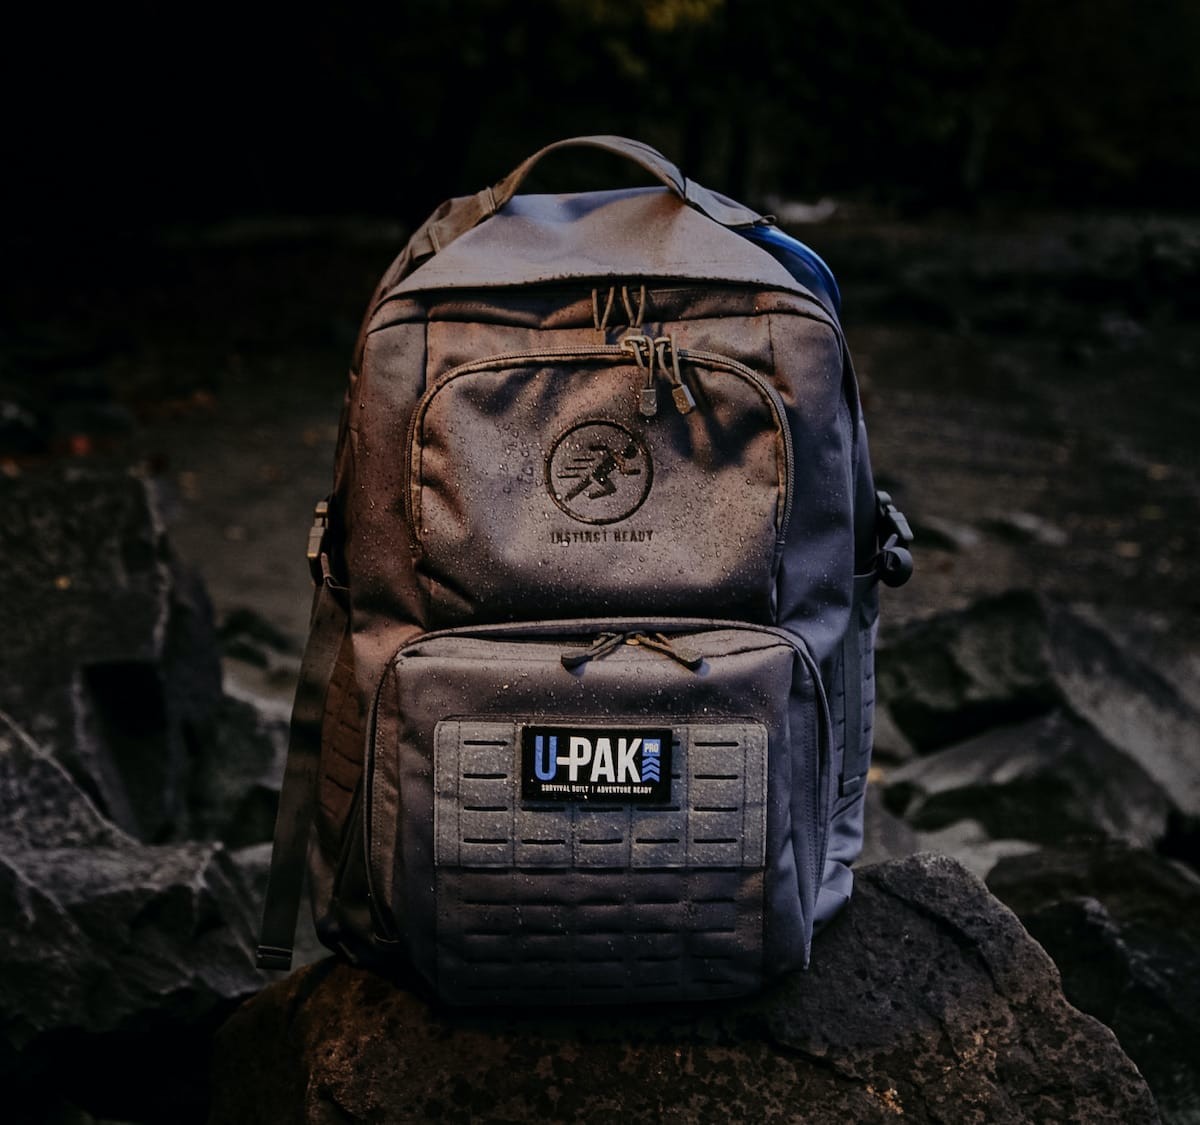 U-PAK Pro adventure-ready survival system helps you survive disasters and camp like a pro